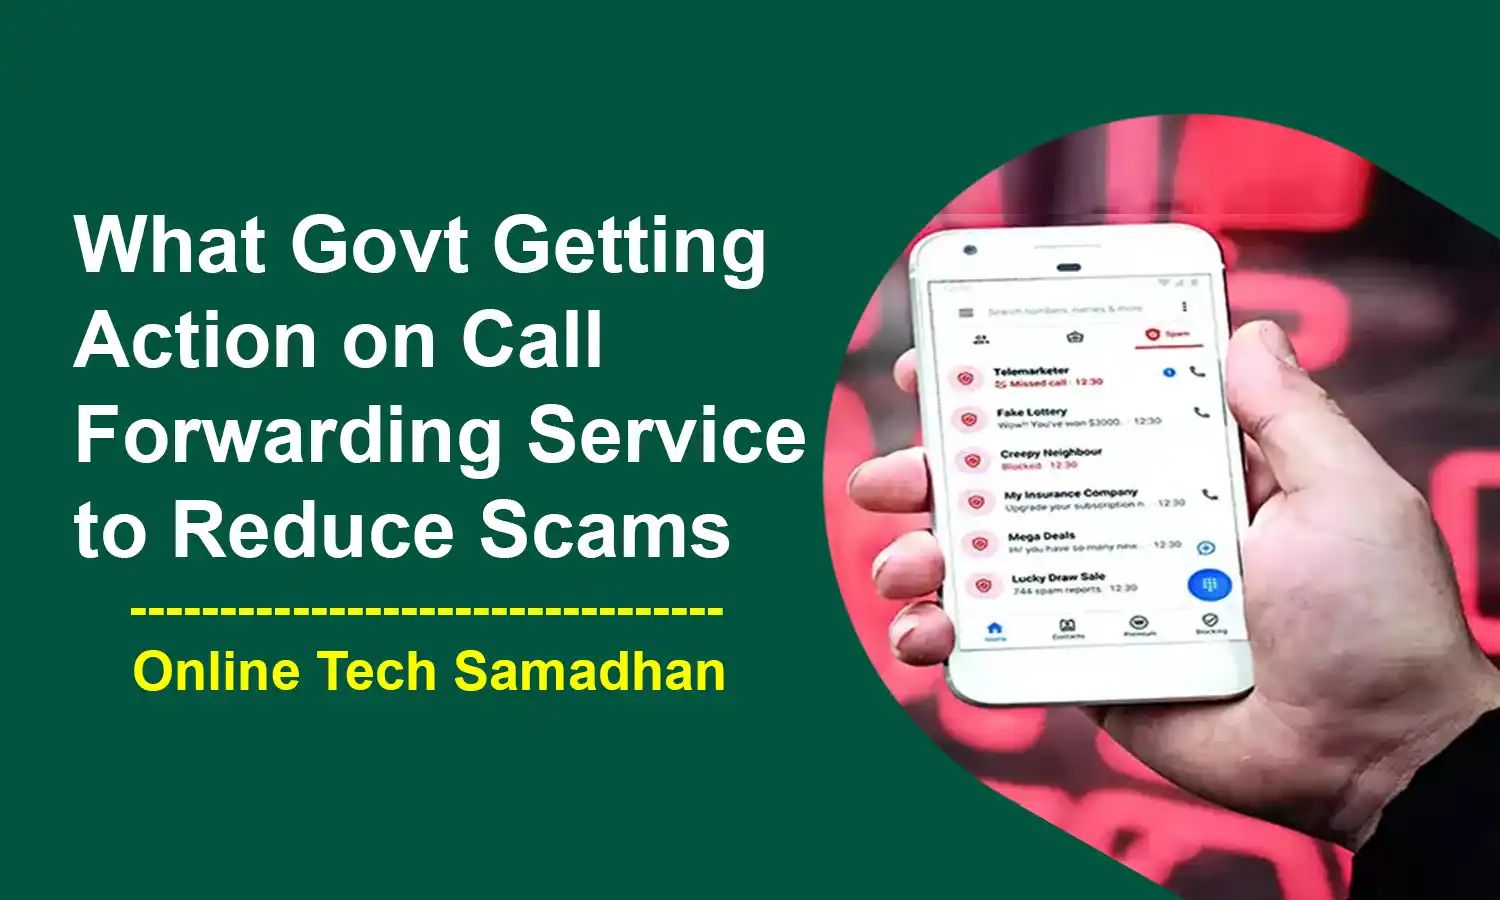 Action on Call Forwarding Service to Reduce Scams